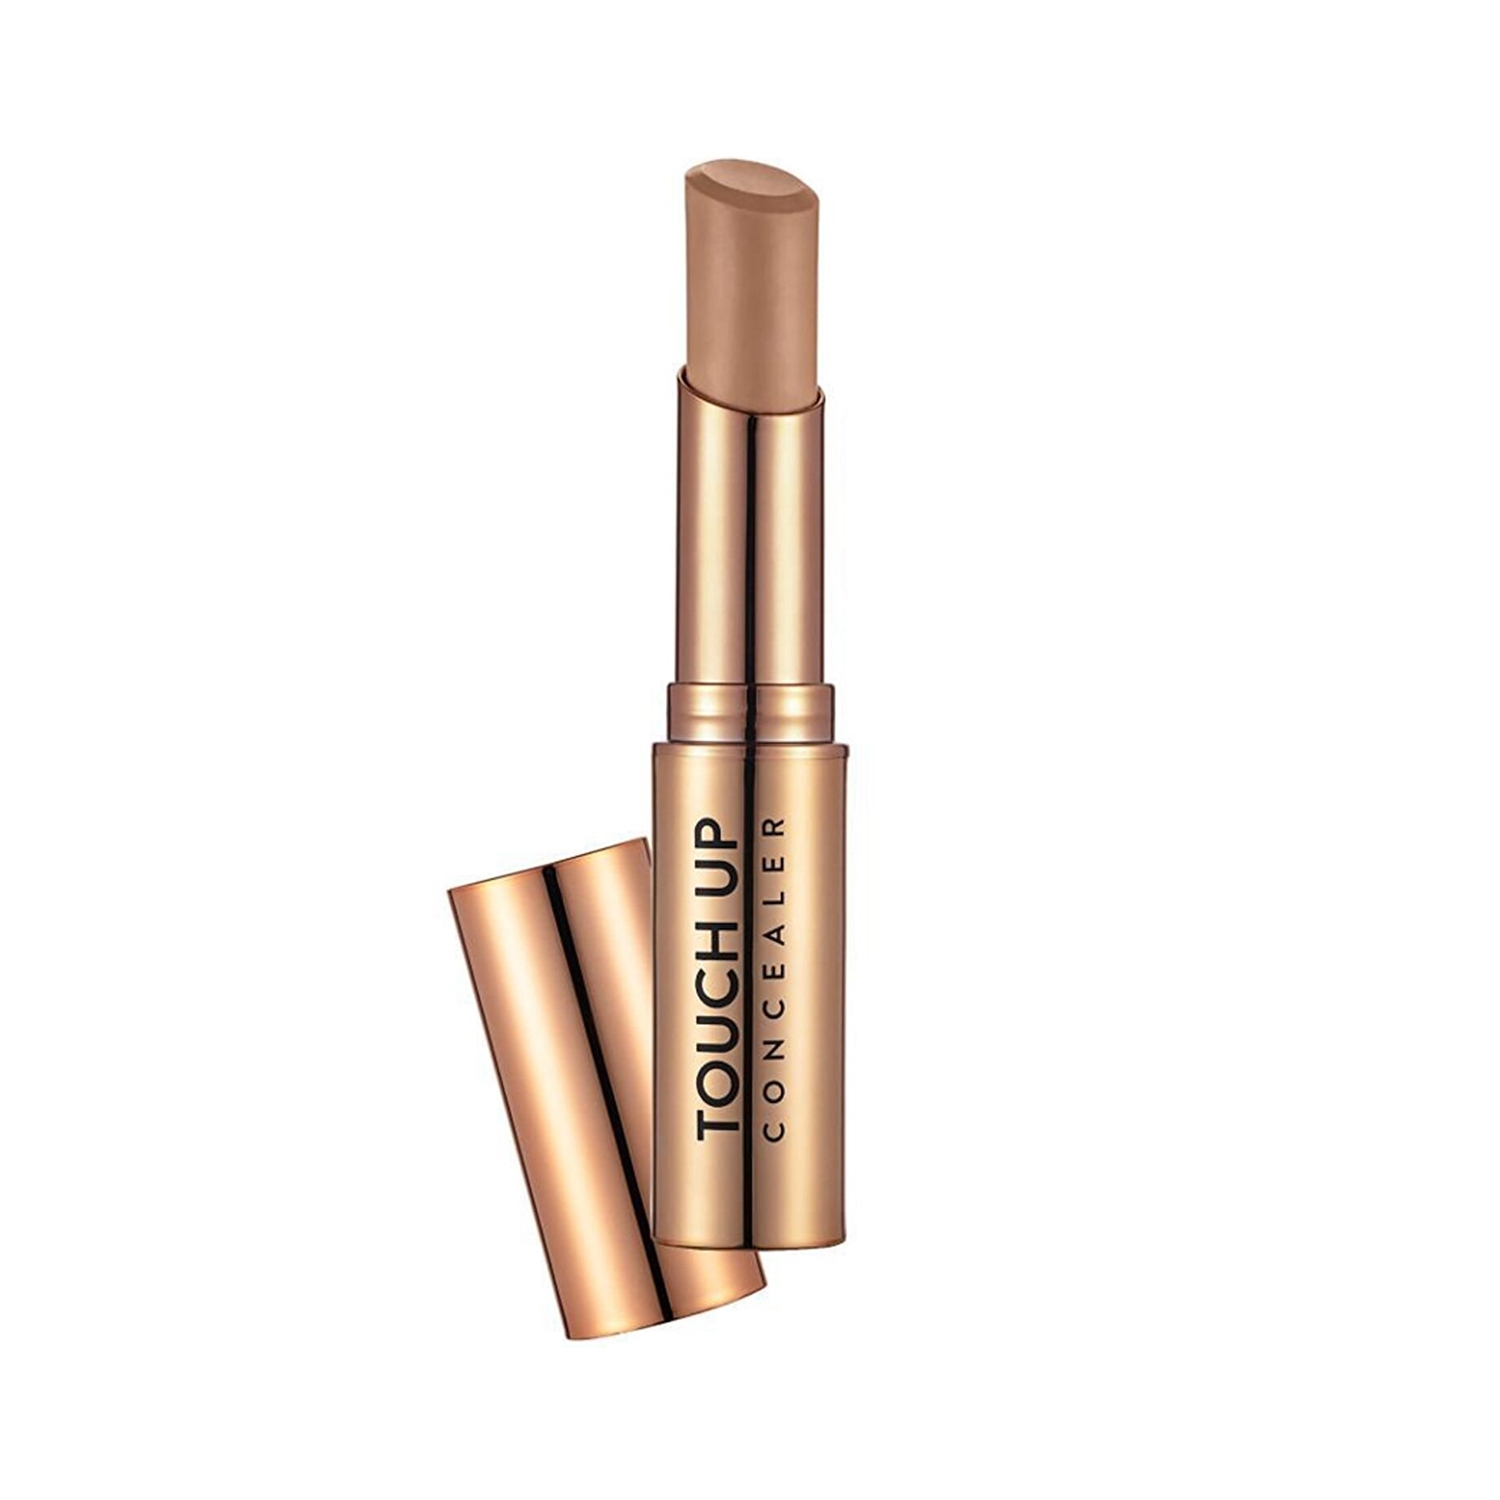 Buy Flormar Perfect Coverage Liquid Concealer 10 Fair from